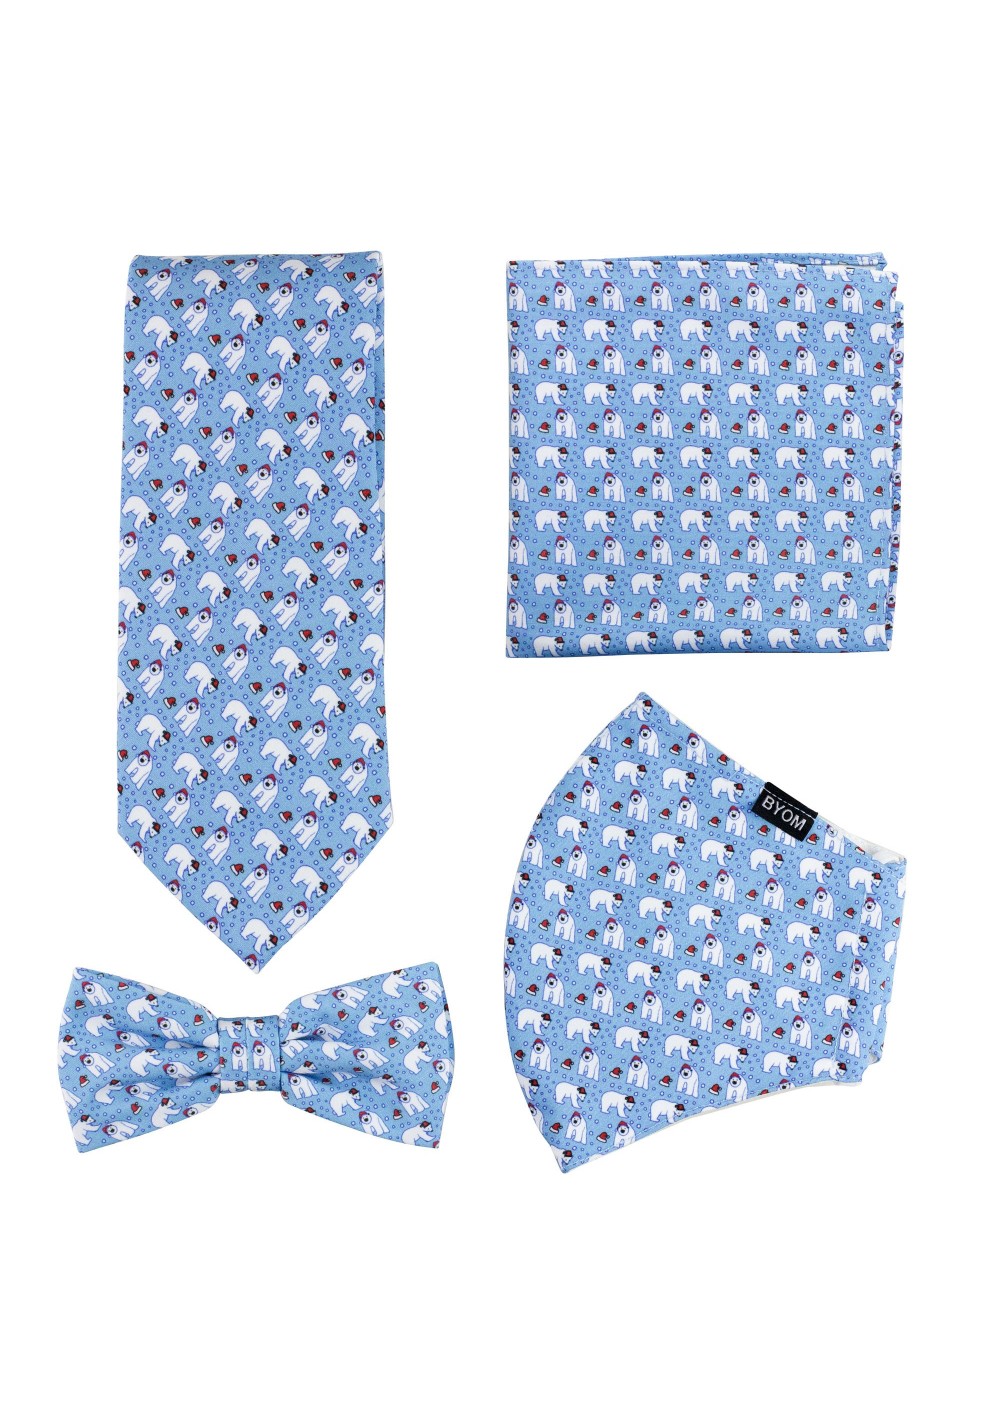 Mask and Tie Set with Polar Bears in Ice Blue